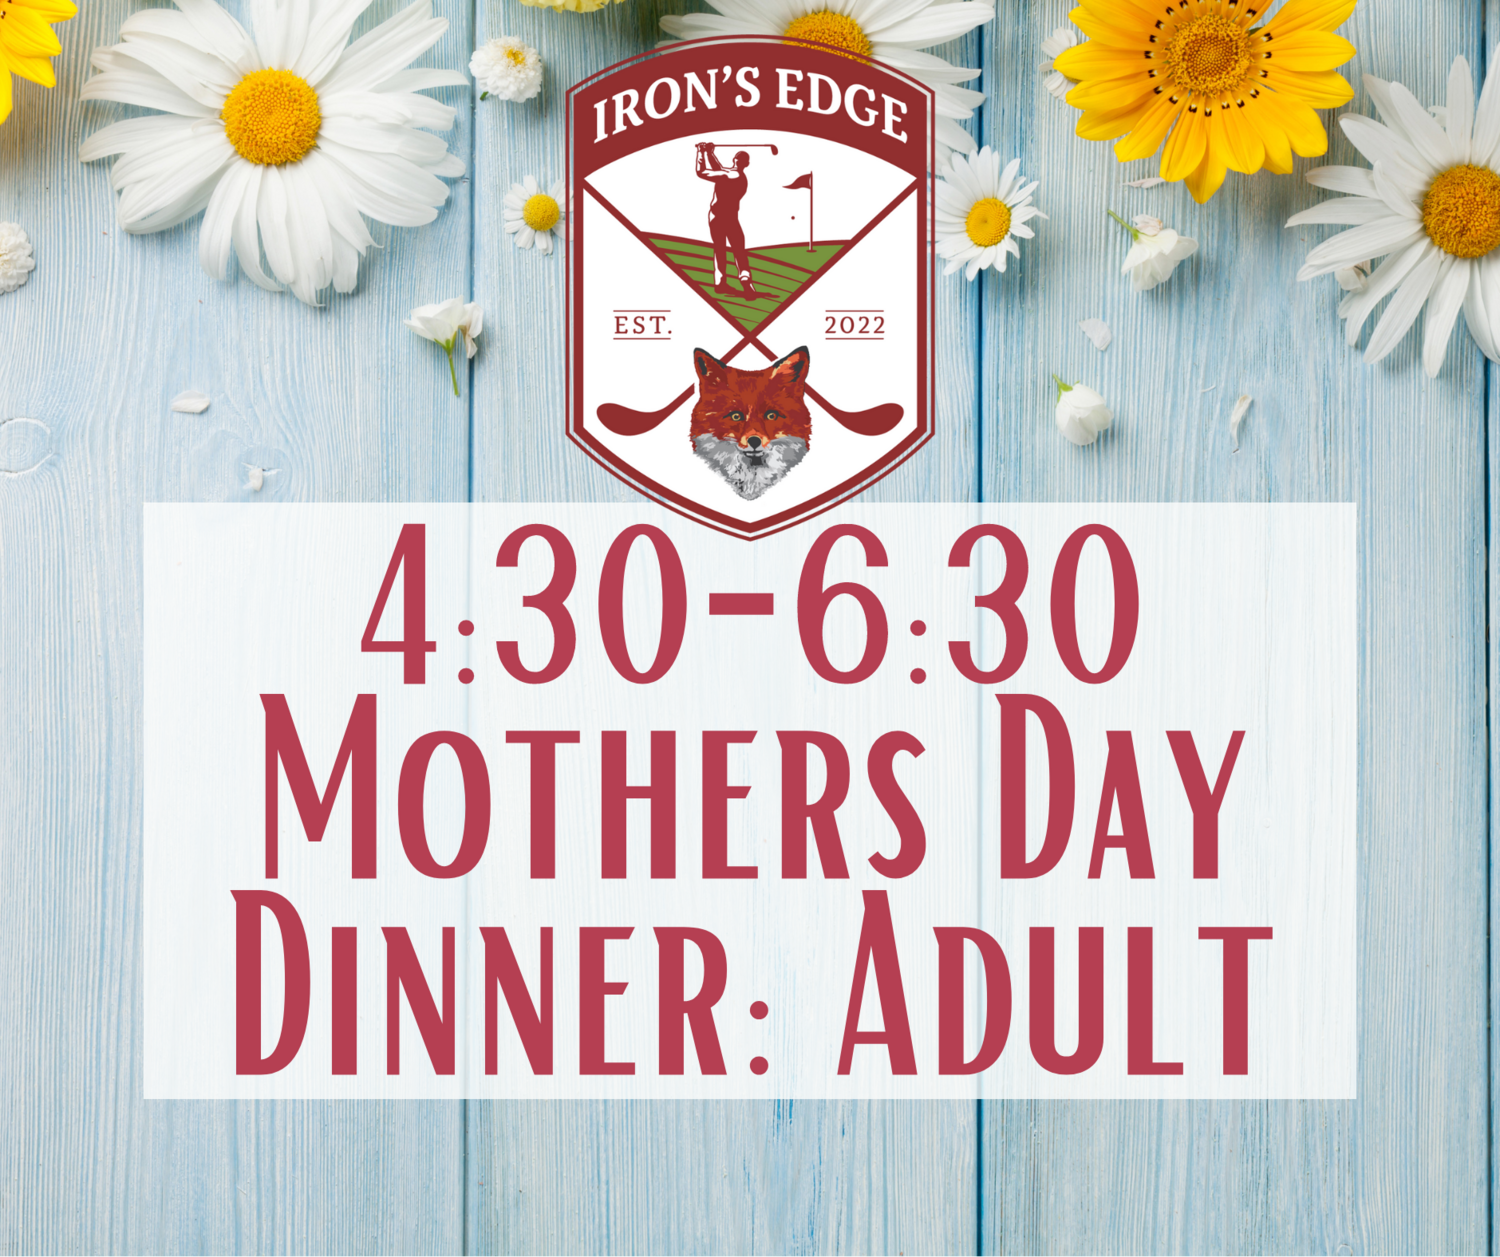 Irons Edge Mother's Day Dinner 4:30 seating: Adult